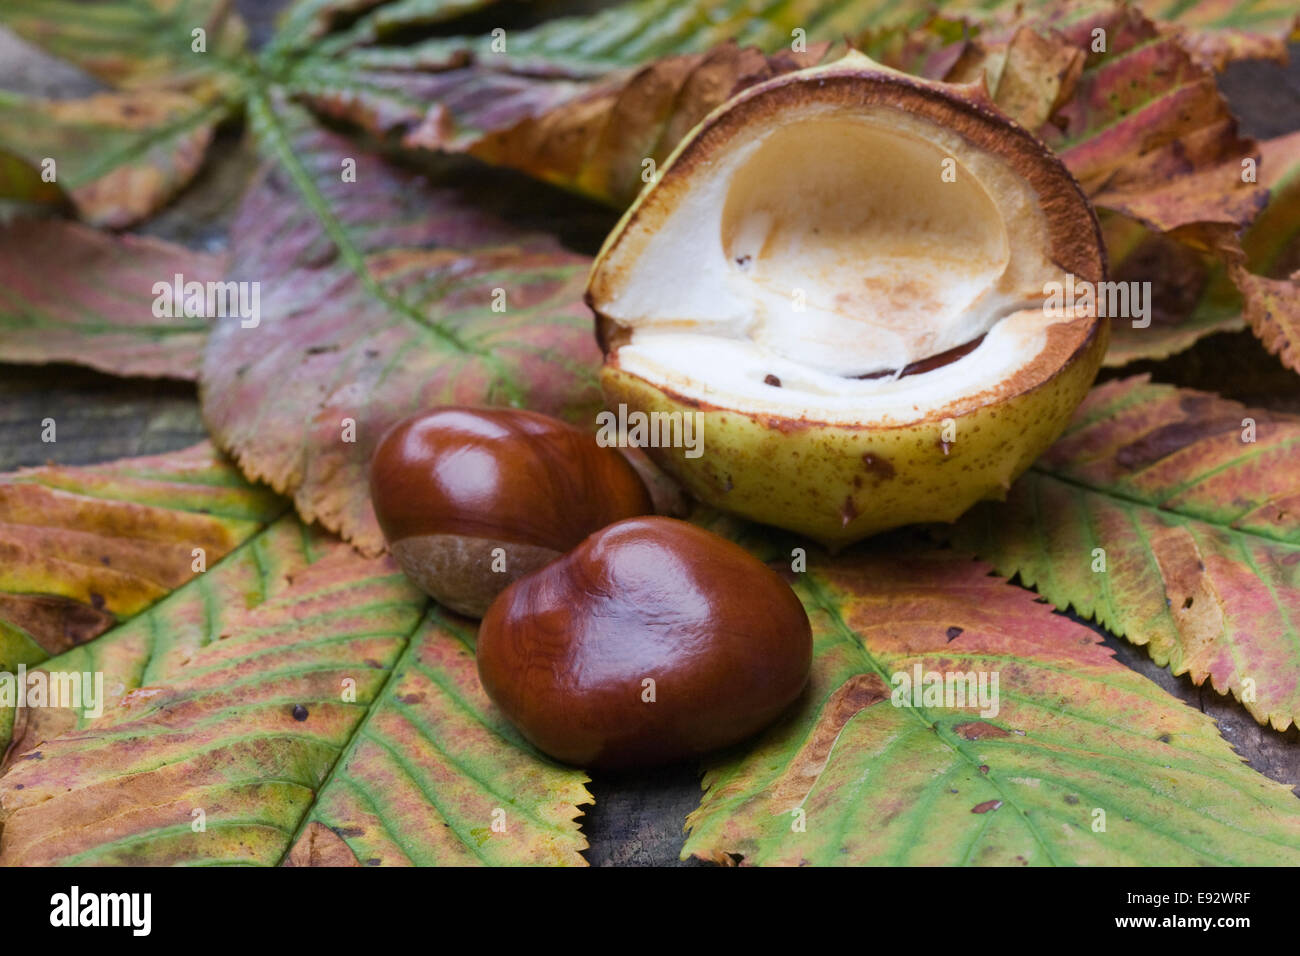 Aesculus hippocastanum. Two horse chestnuts on leaves. Stock Photo